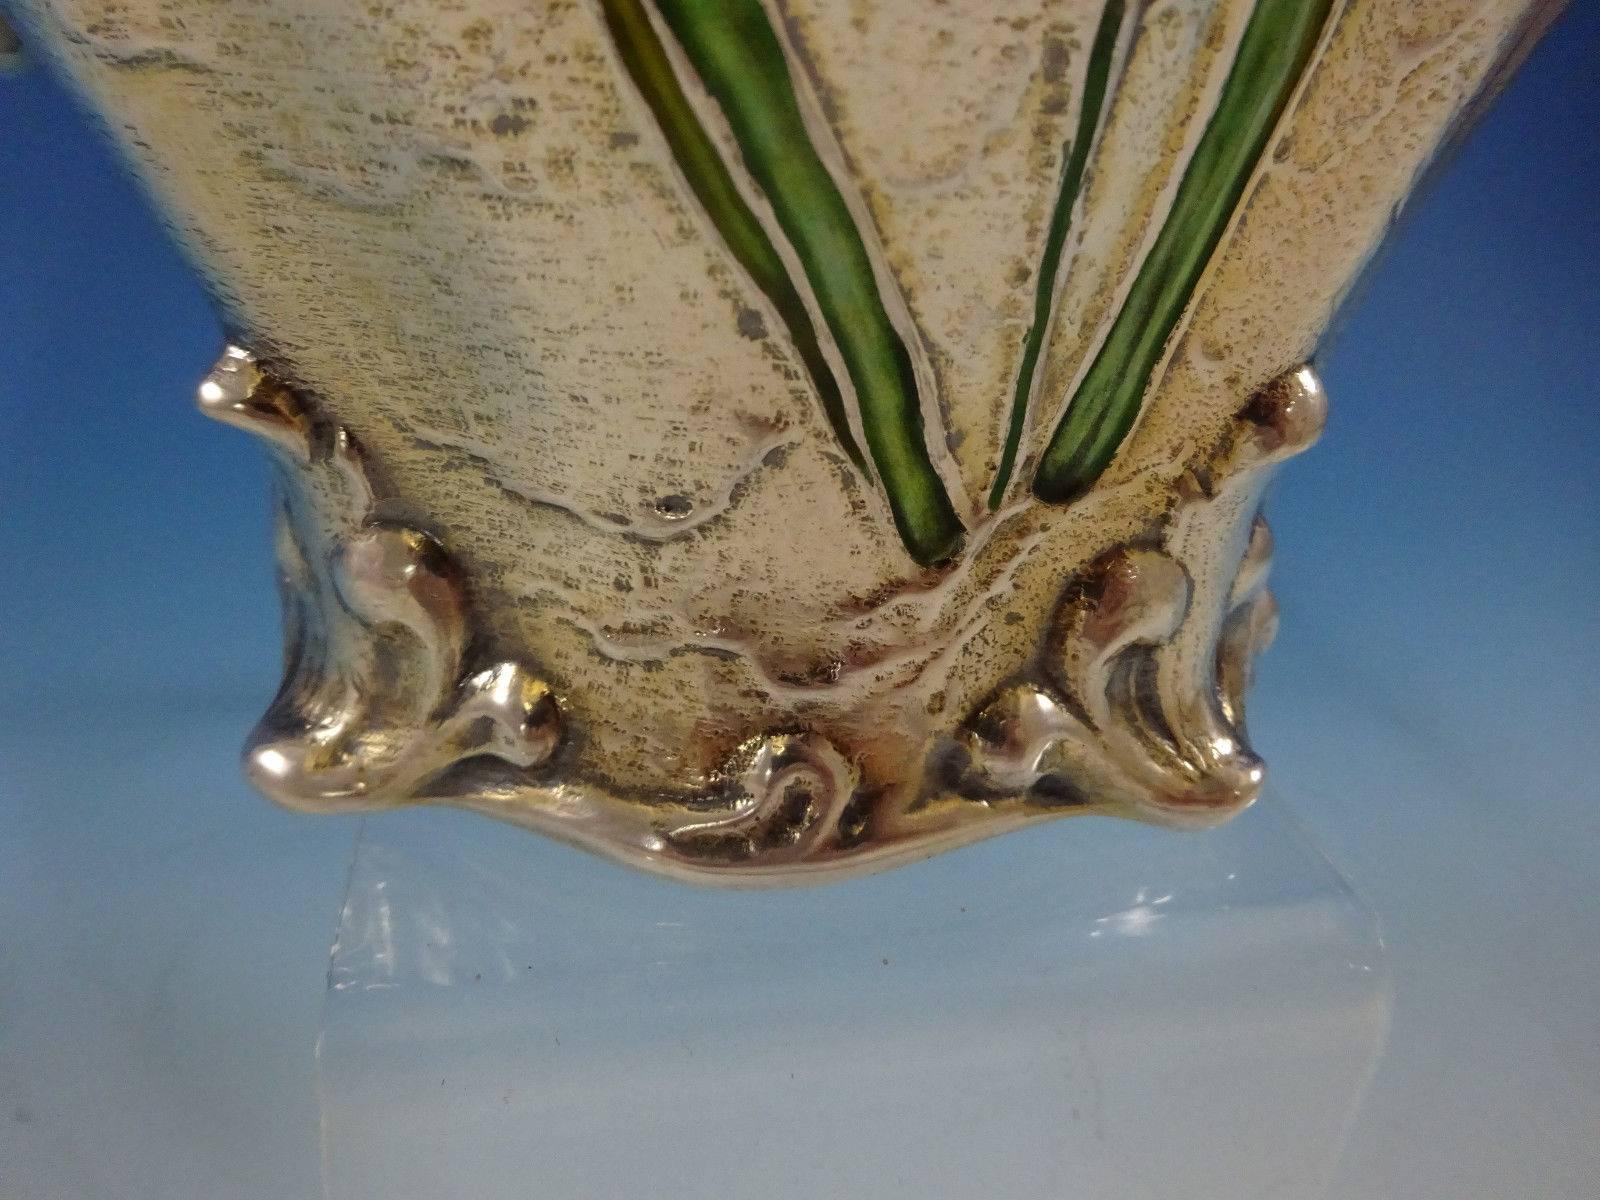 Gorham Enameled Rare Sterling Silver Water Pitcher with Iris, Dated 1897 Antique 1